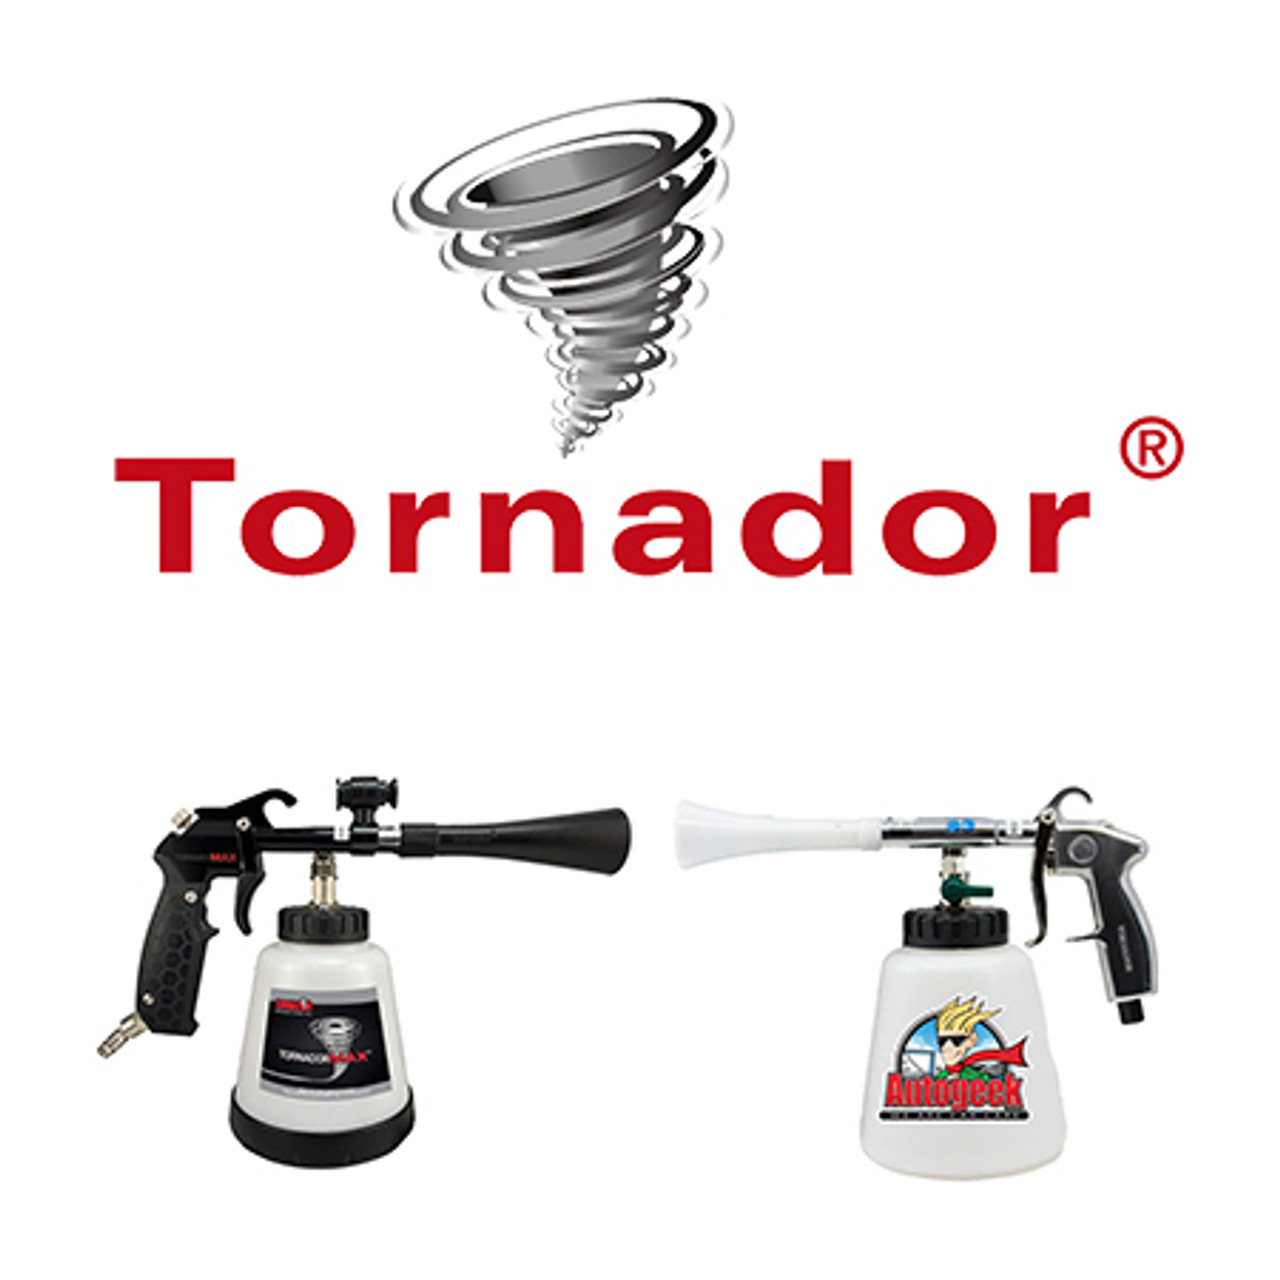 Tornador Air Tool Z-014 - Details Exclusive Product